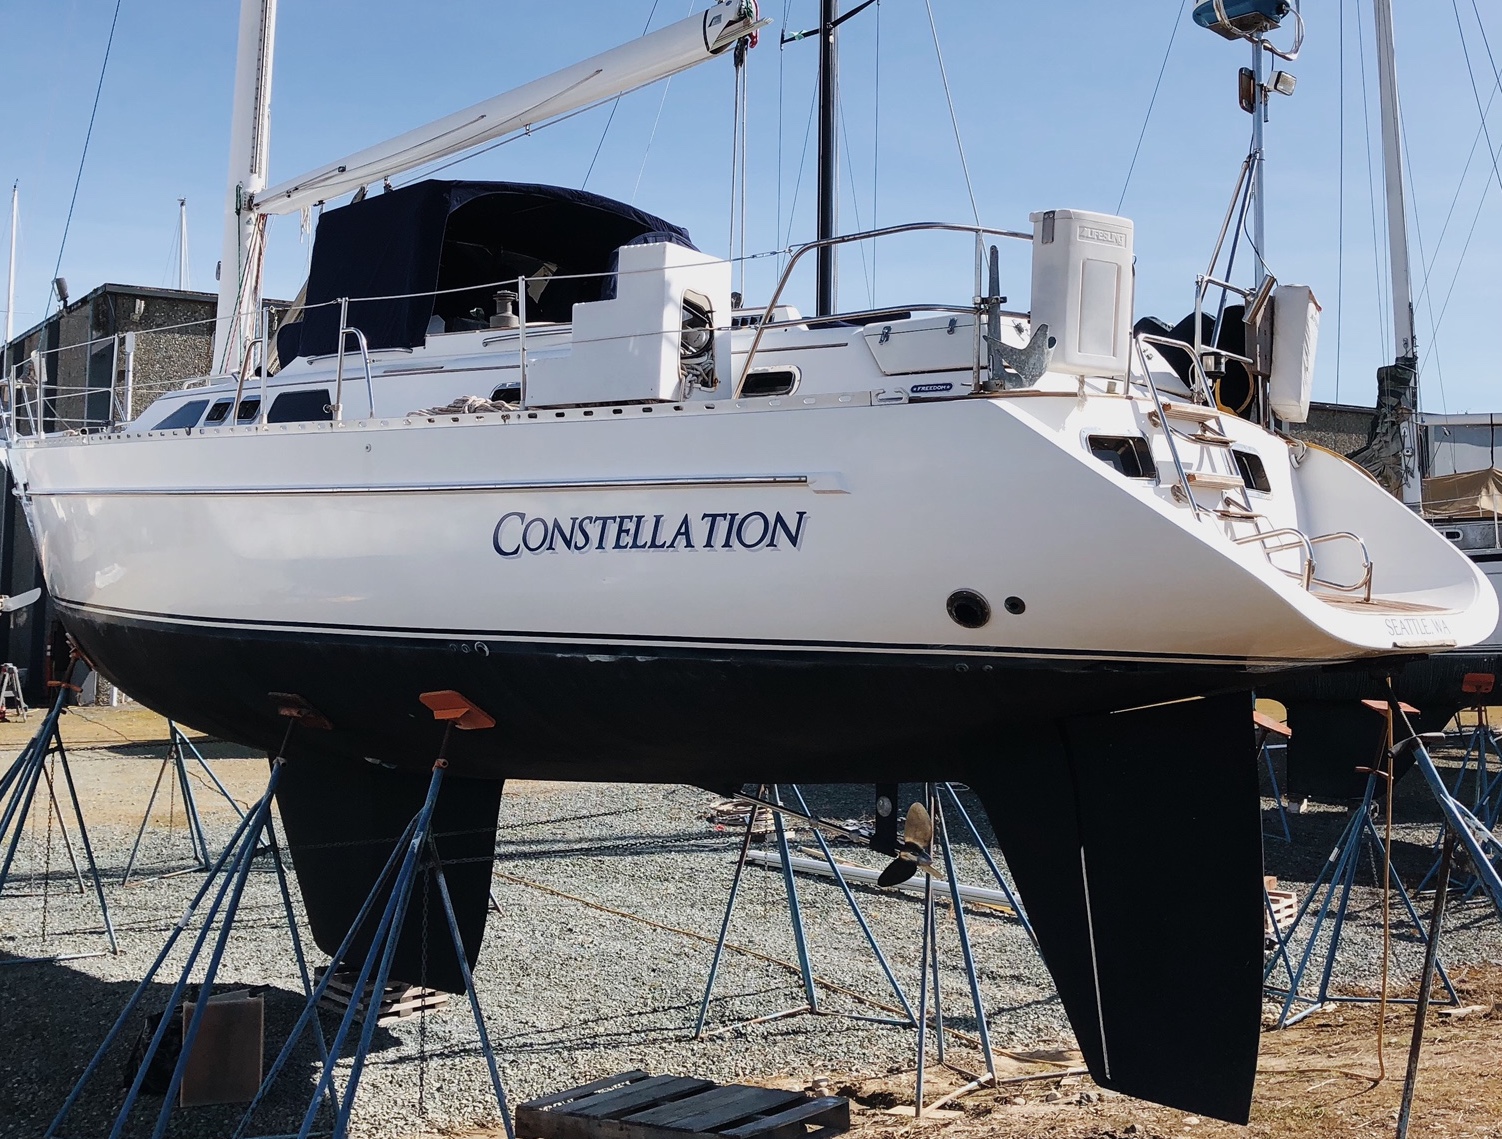 Sailboat restoration projects to get our boat ready for living aboard